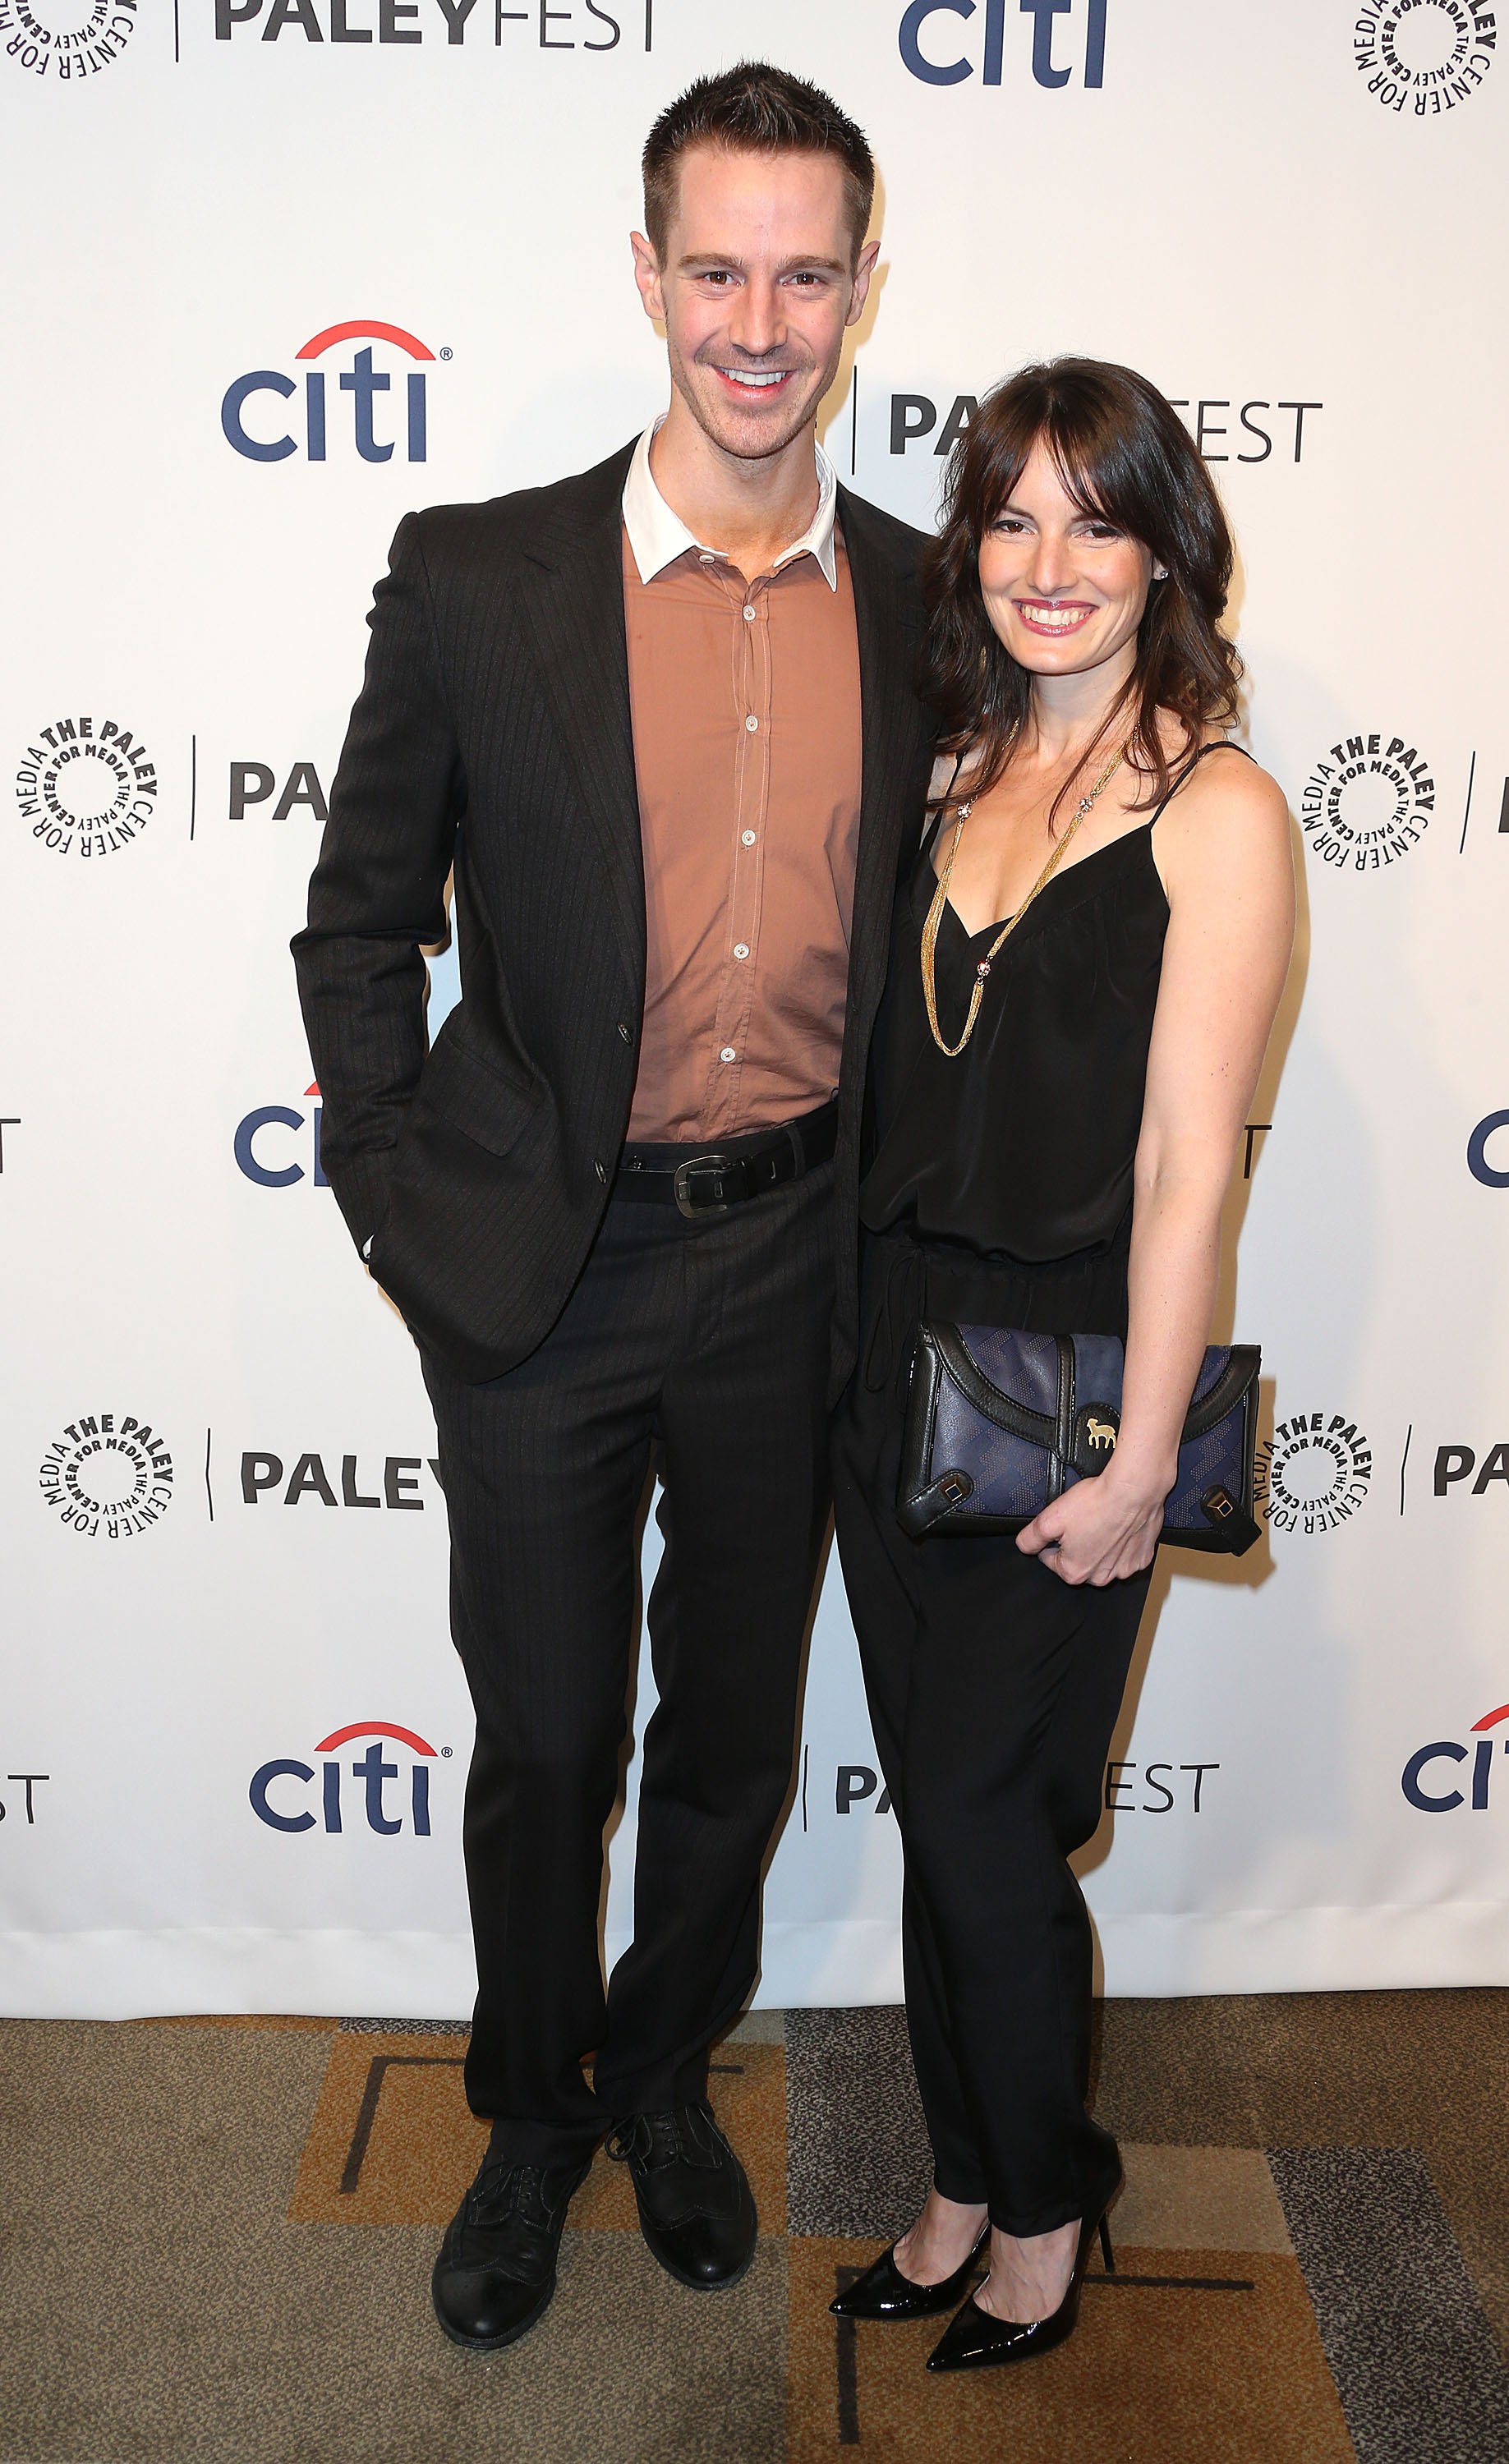 Jason Dohring and Lauren Kutner at The Paley Center for Media's PaleyFest 2014 Honoring "Veronica Mars" at the Dolby Theatre in Hollywood, California on March 13, 2014. | Source: Getty Images